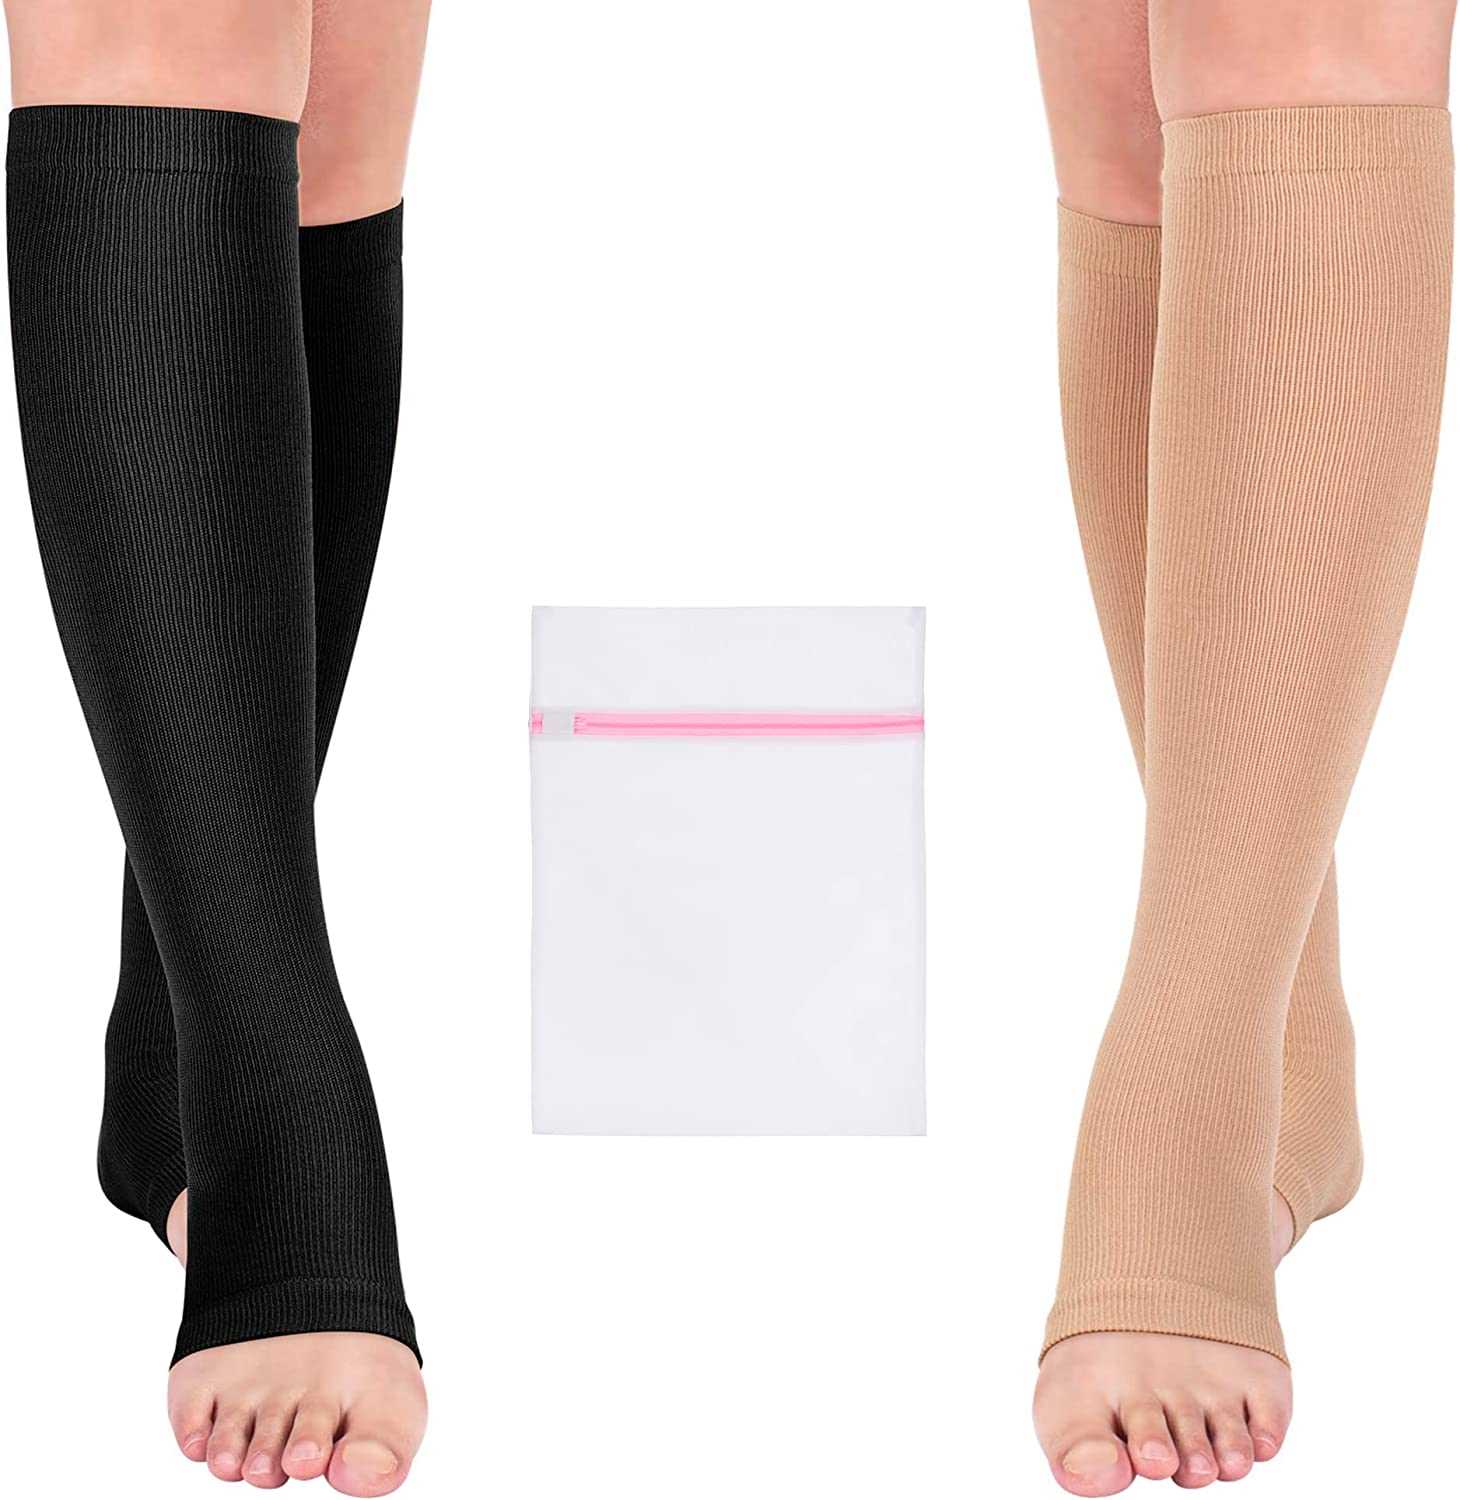 1 Pair Small - Medium Unisex Compression Socks Open Toe Medical for Women and Men